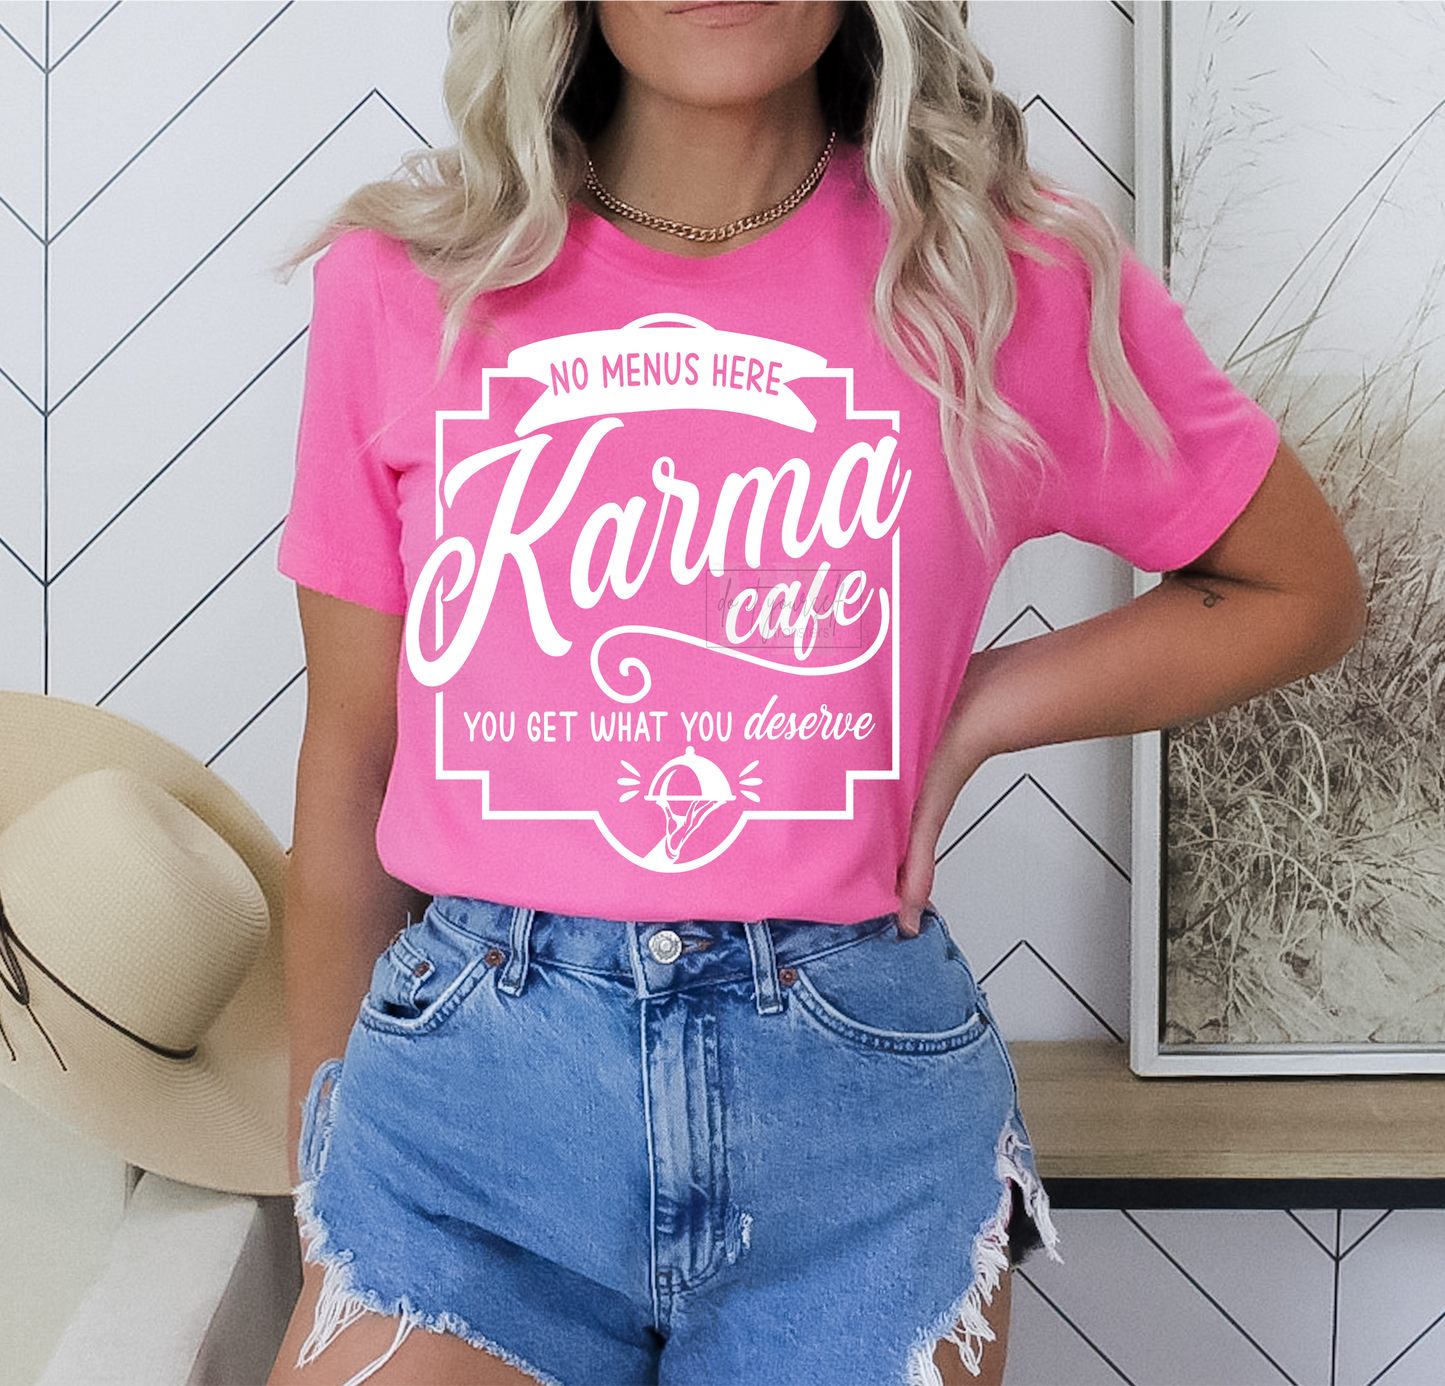 No menus here KARMA cafe you get what you deserve SINGLE COLOR WHITE   size ADULT 10.5X12 DTF TRANSFERPRINT TO ORDER